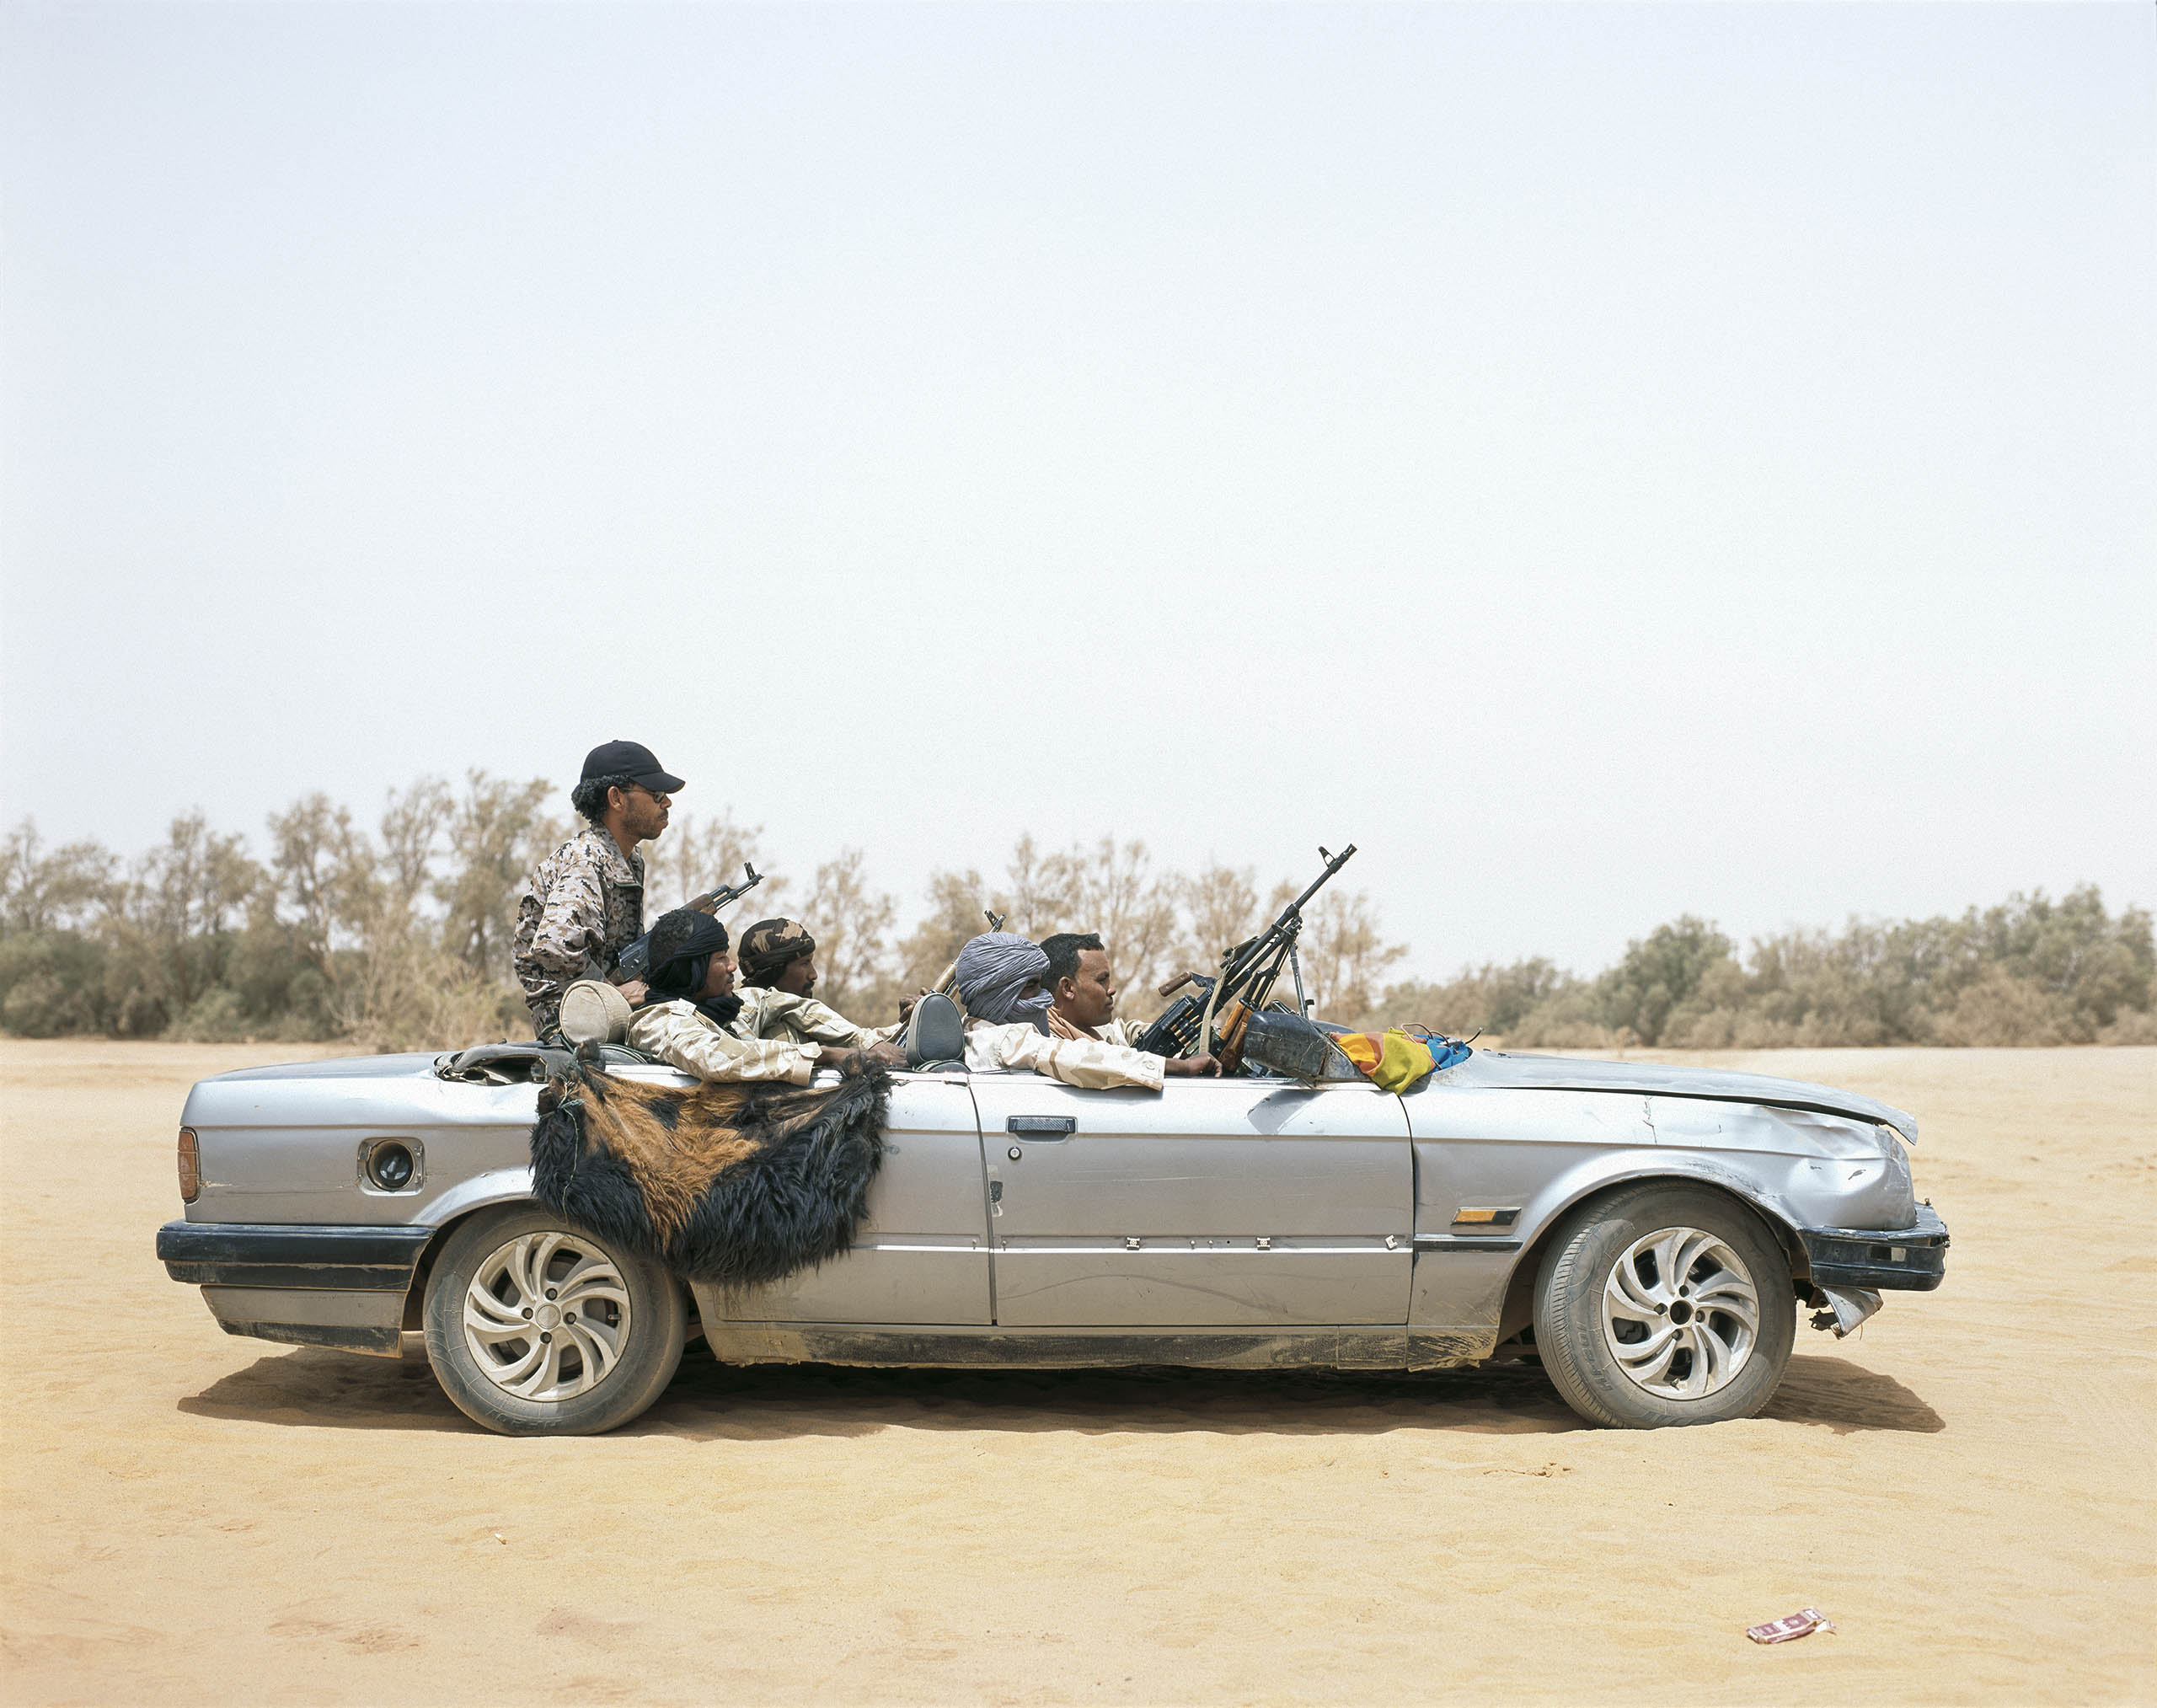 Soldiers from the Tuareg tribe on patrol in Ubari, which has gone from being a garrison town to a violent hub for smuggling.